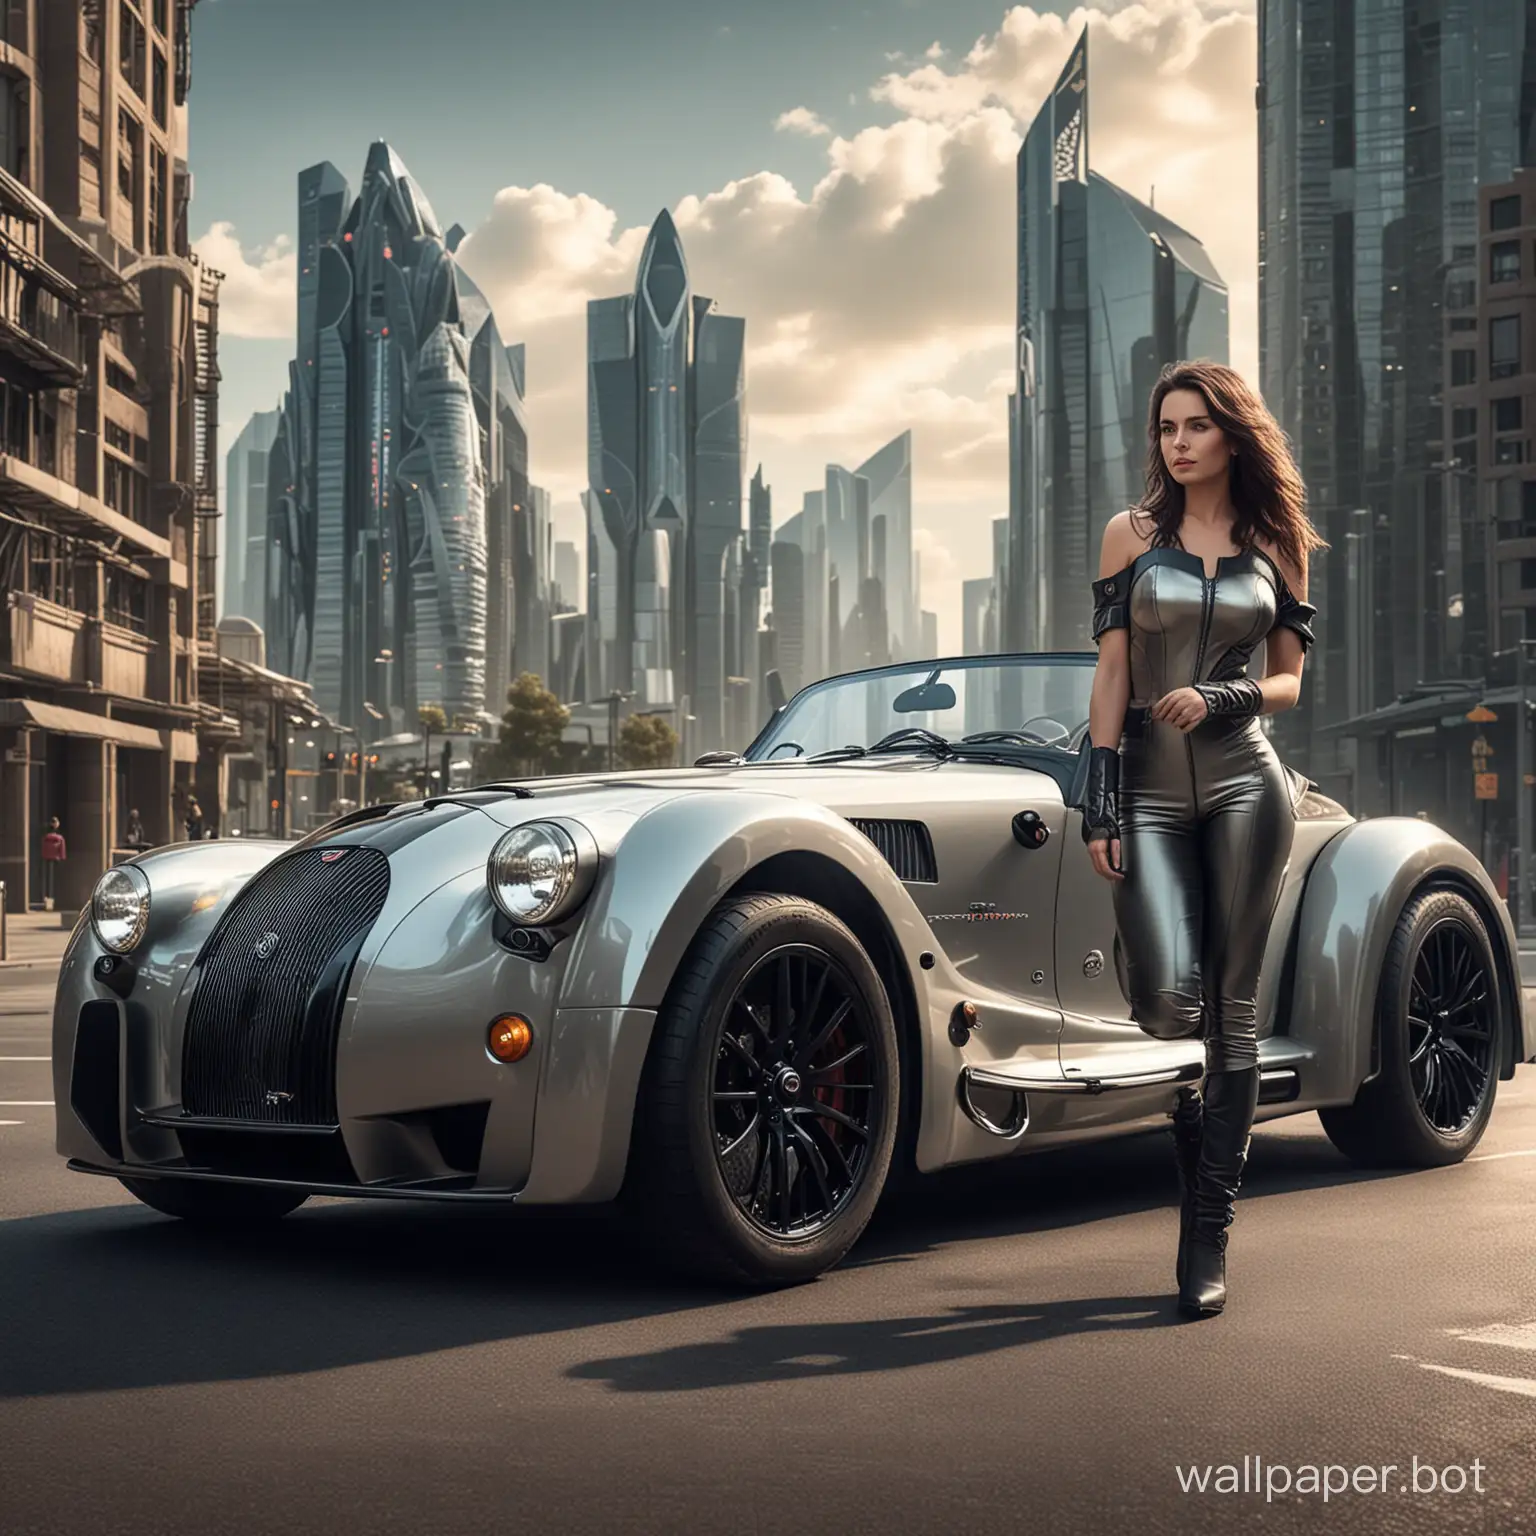 Morgan car grand sport car with a brunette girl standing near with futuristic city background